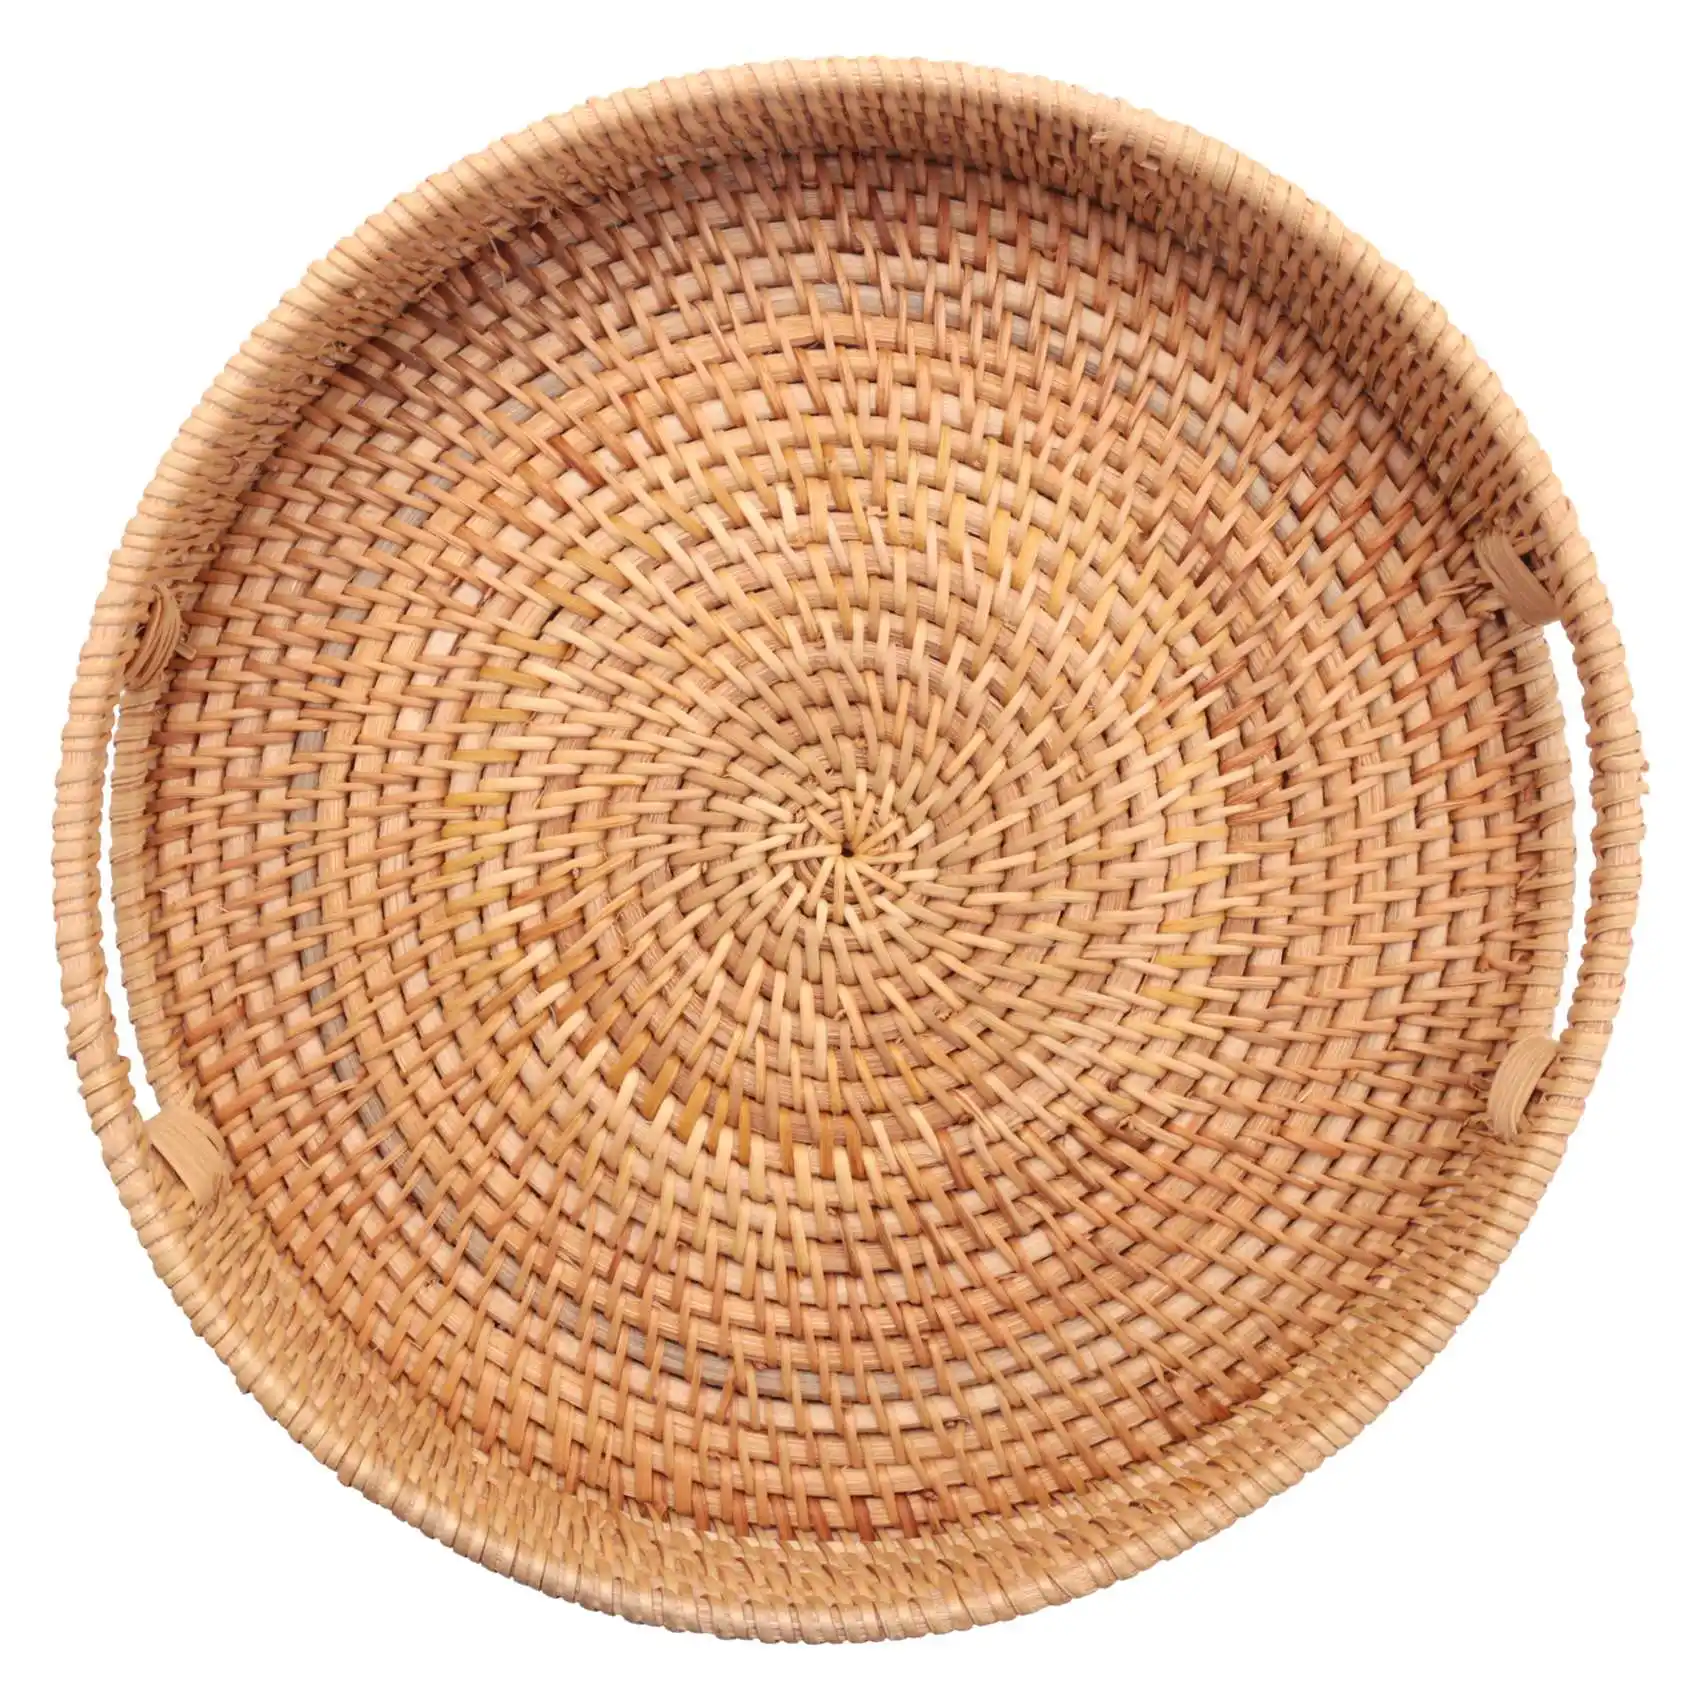 

Round Rattan Woven Serving Tray with Handles Ottoman Tray for Breakfast, Drinks, Snack for Coffee Table, Home Decorative